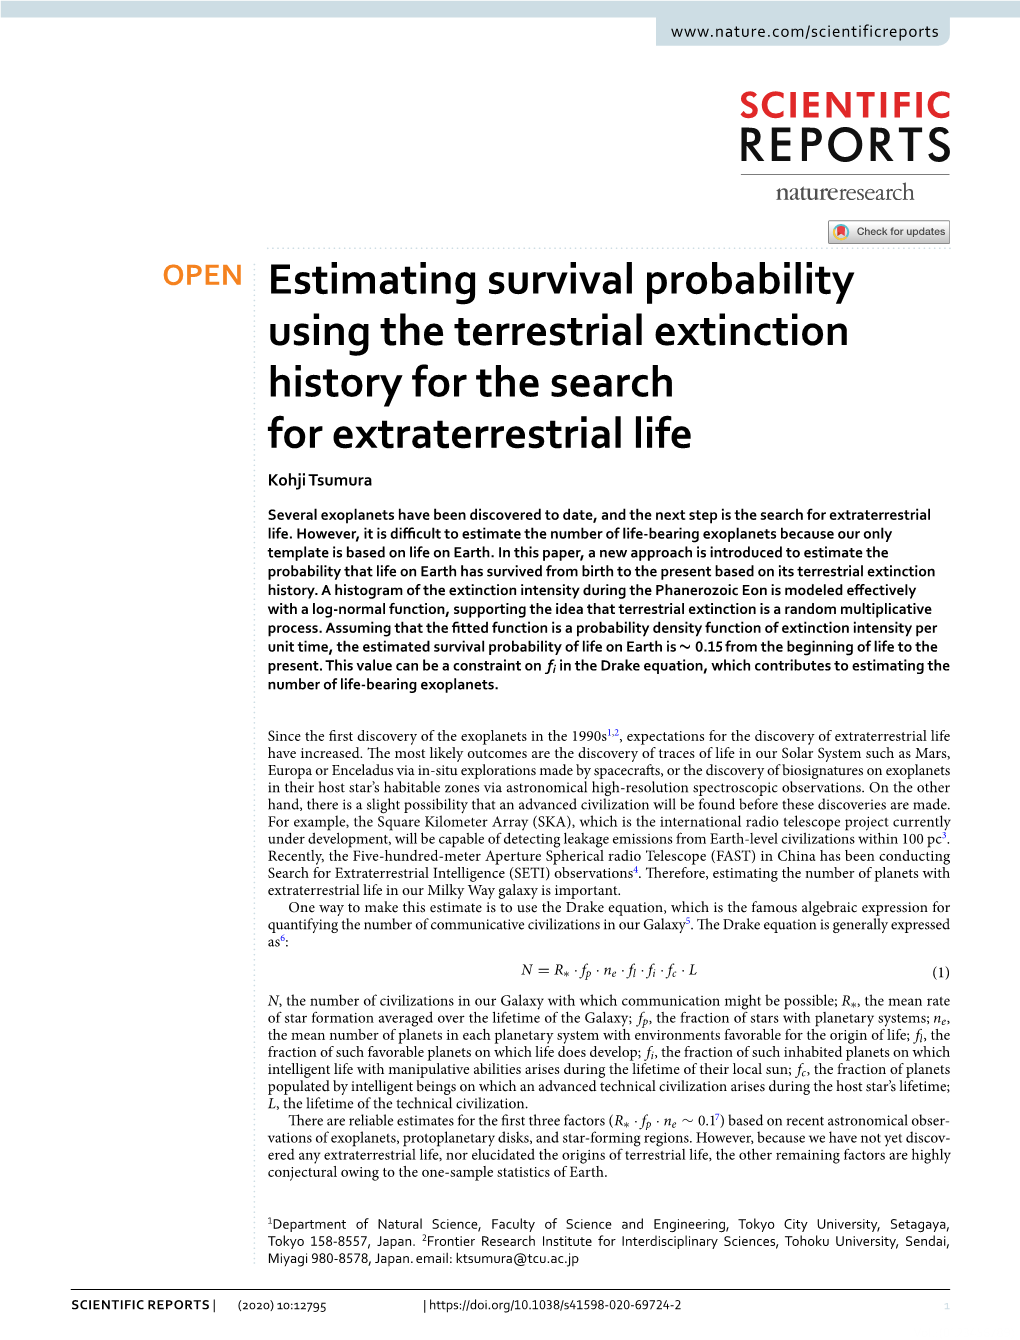 Estimating Survival Probability Using the Terrestrial Extinction History for the Search for Extraterrestrial Life Kohji Tsumura